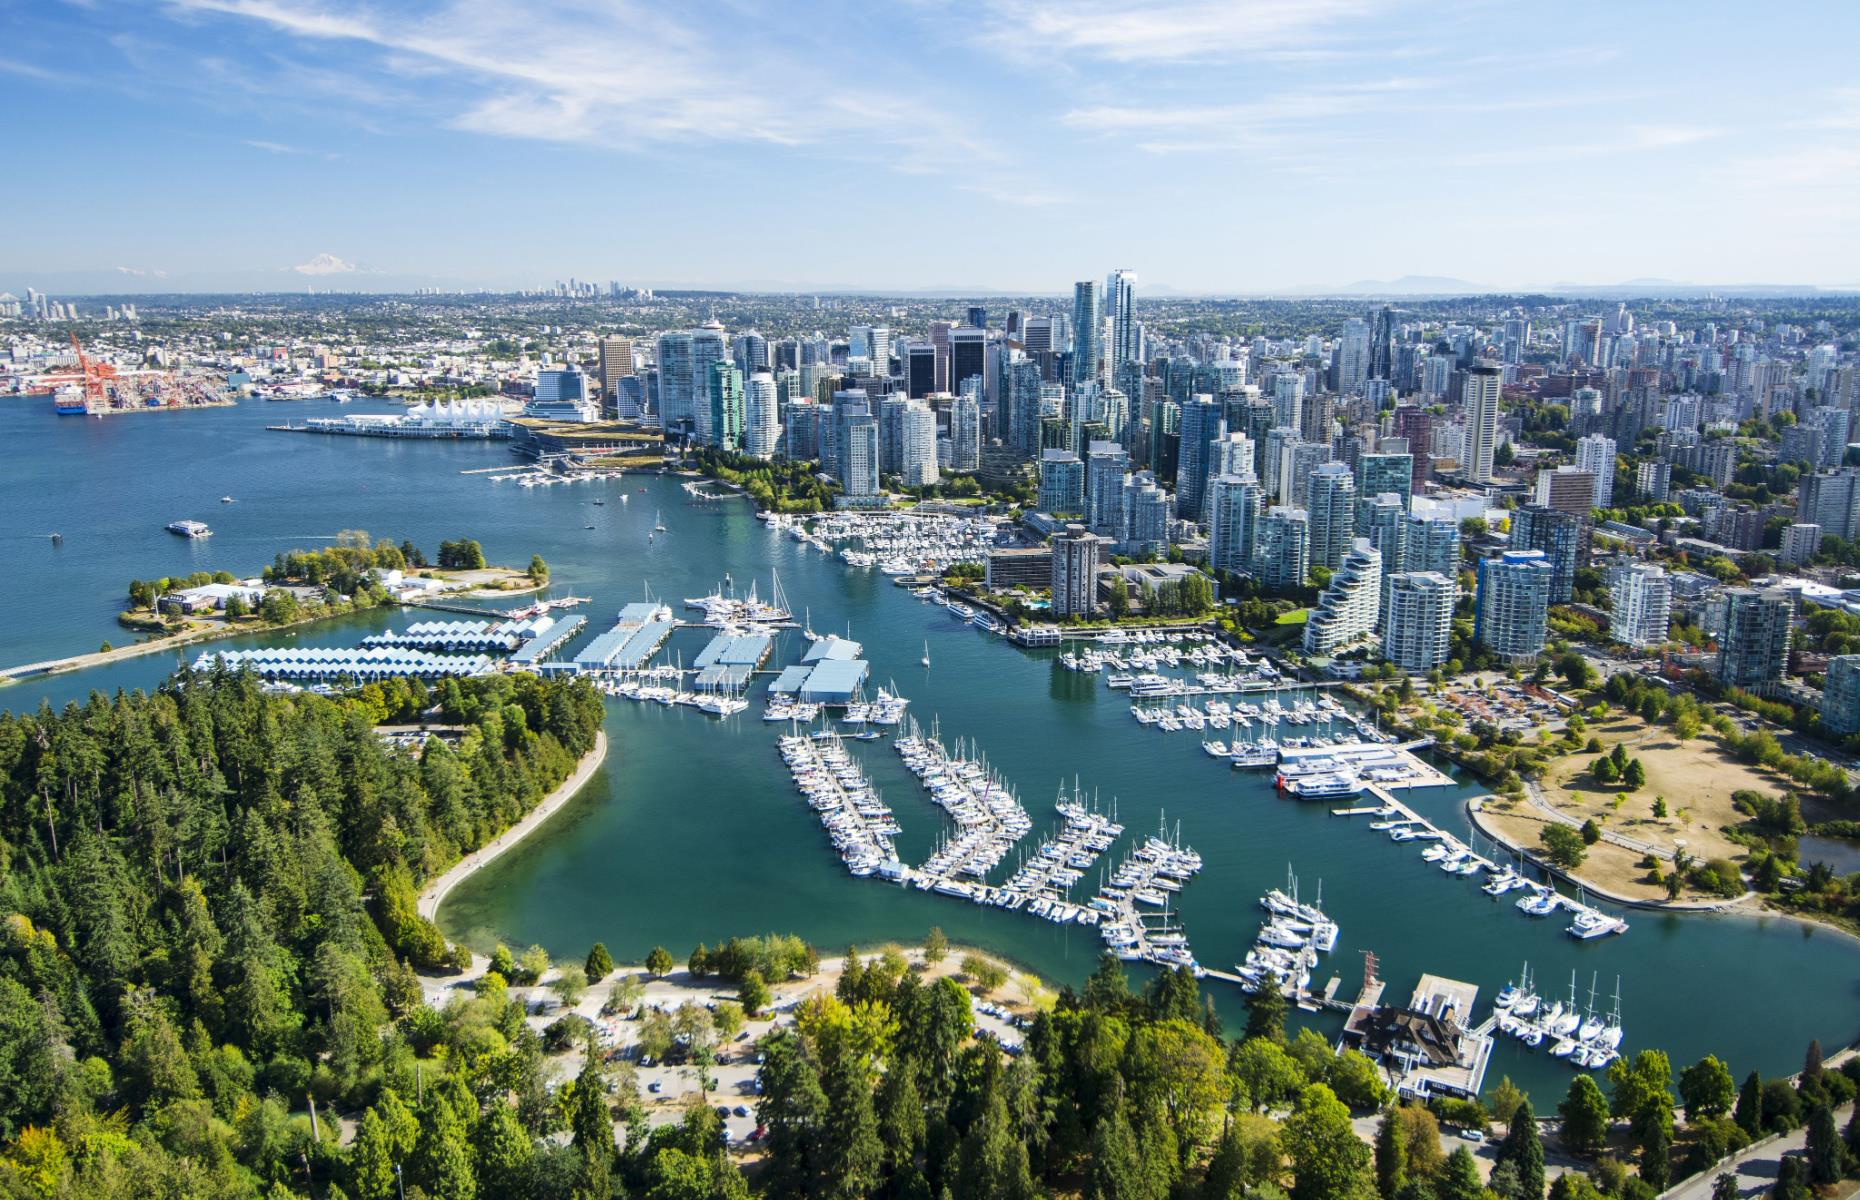 <p>This coastal metropolis is undoubtedly one of the most beautiful cities in the world, combining rugged west coast nature with glassy modern buildings. The heart of Vancouver is Stanley Park, a 400-hectare patch of West Coast rainforest complete with bike paths, viewpoints and the <a href="https://www.vanaqua.org/">Vancouver Aquarium</a>. The rest of the city is crisscrossed with waterways that reflect off the windows of all those glass towers, as well as intriguing neighborhoods lined with trees, cool shops and restaurants.</p>